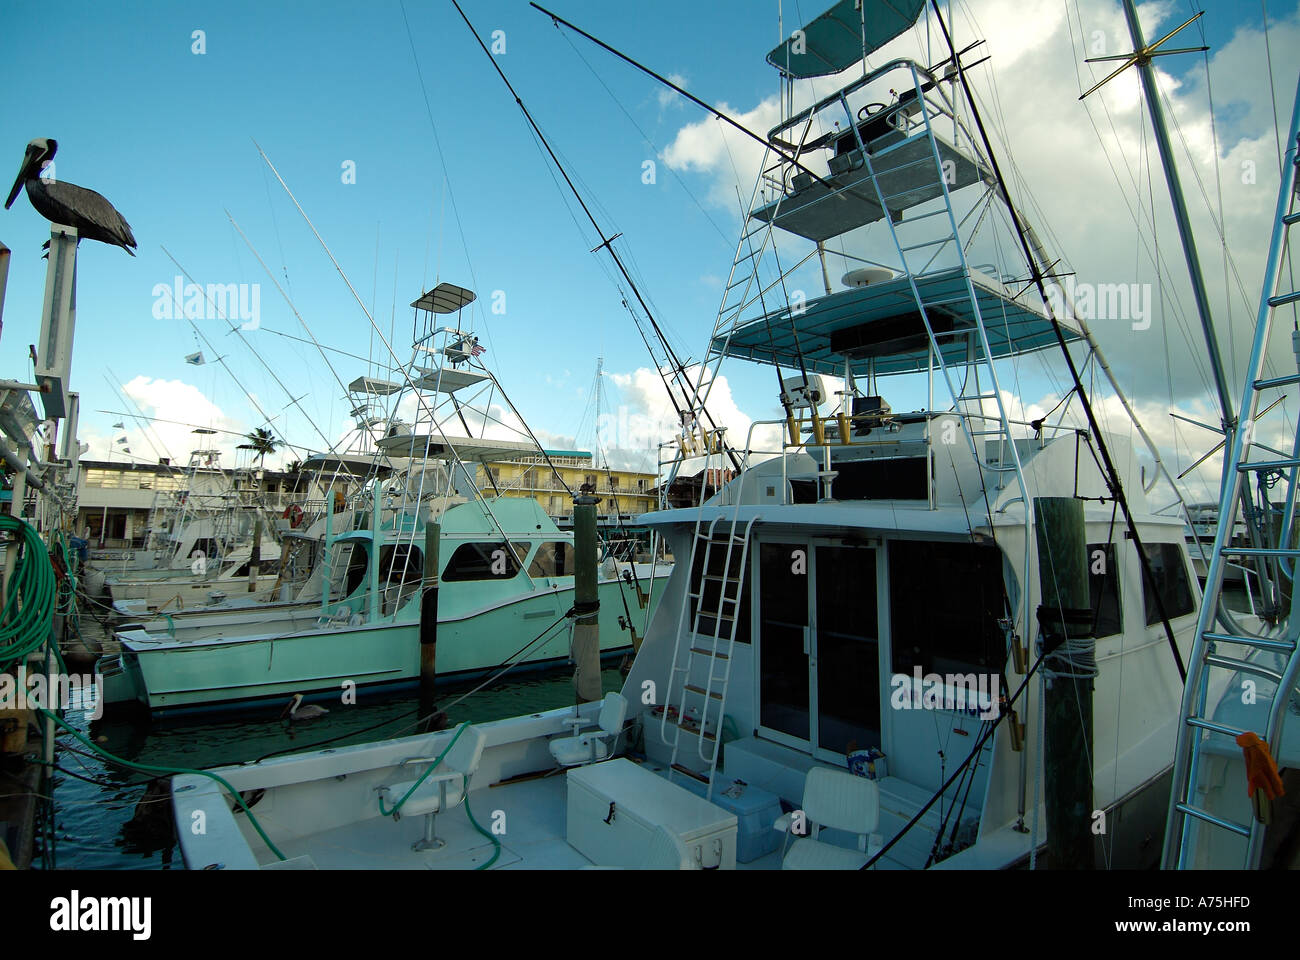 https://c8.alamy.com/comp/A75HFD/charter-fishing-boats-in-key-largo-in-florida-A75HFD.jpg